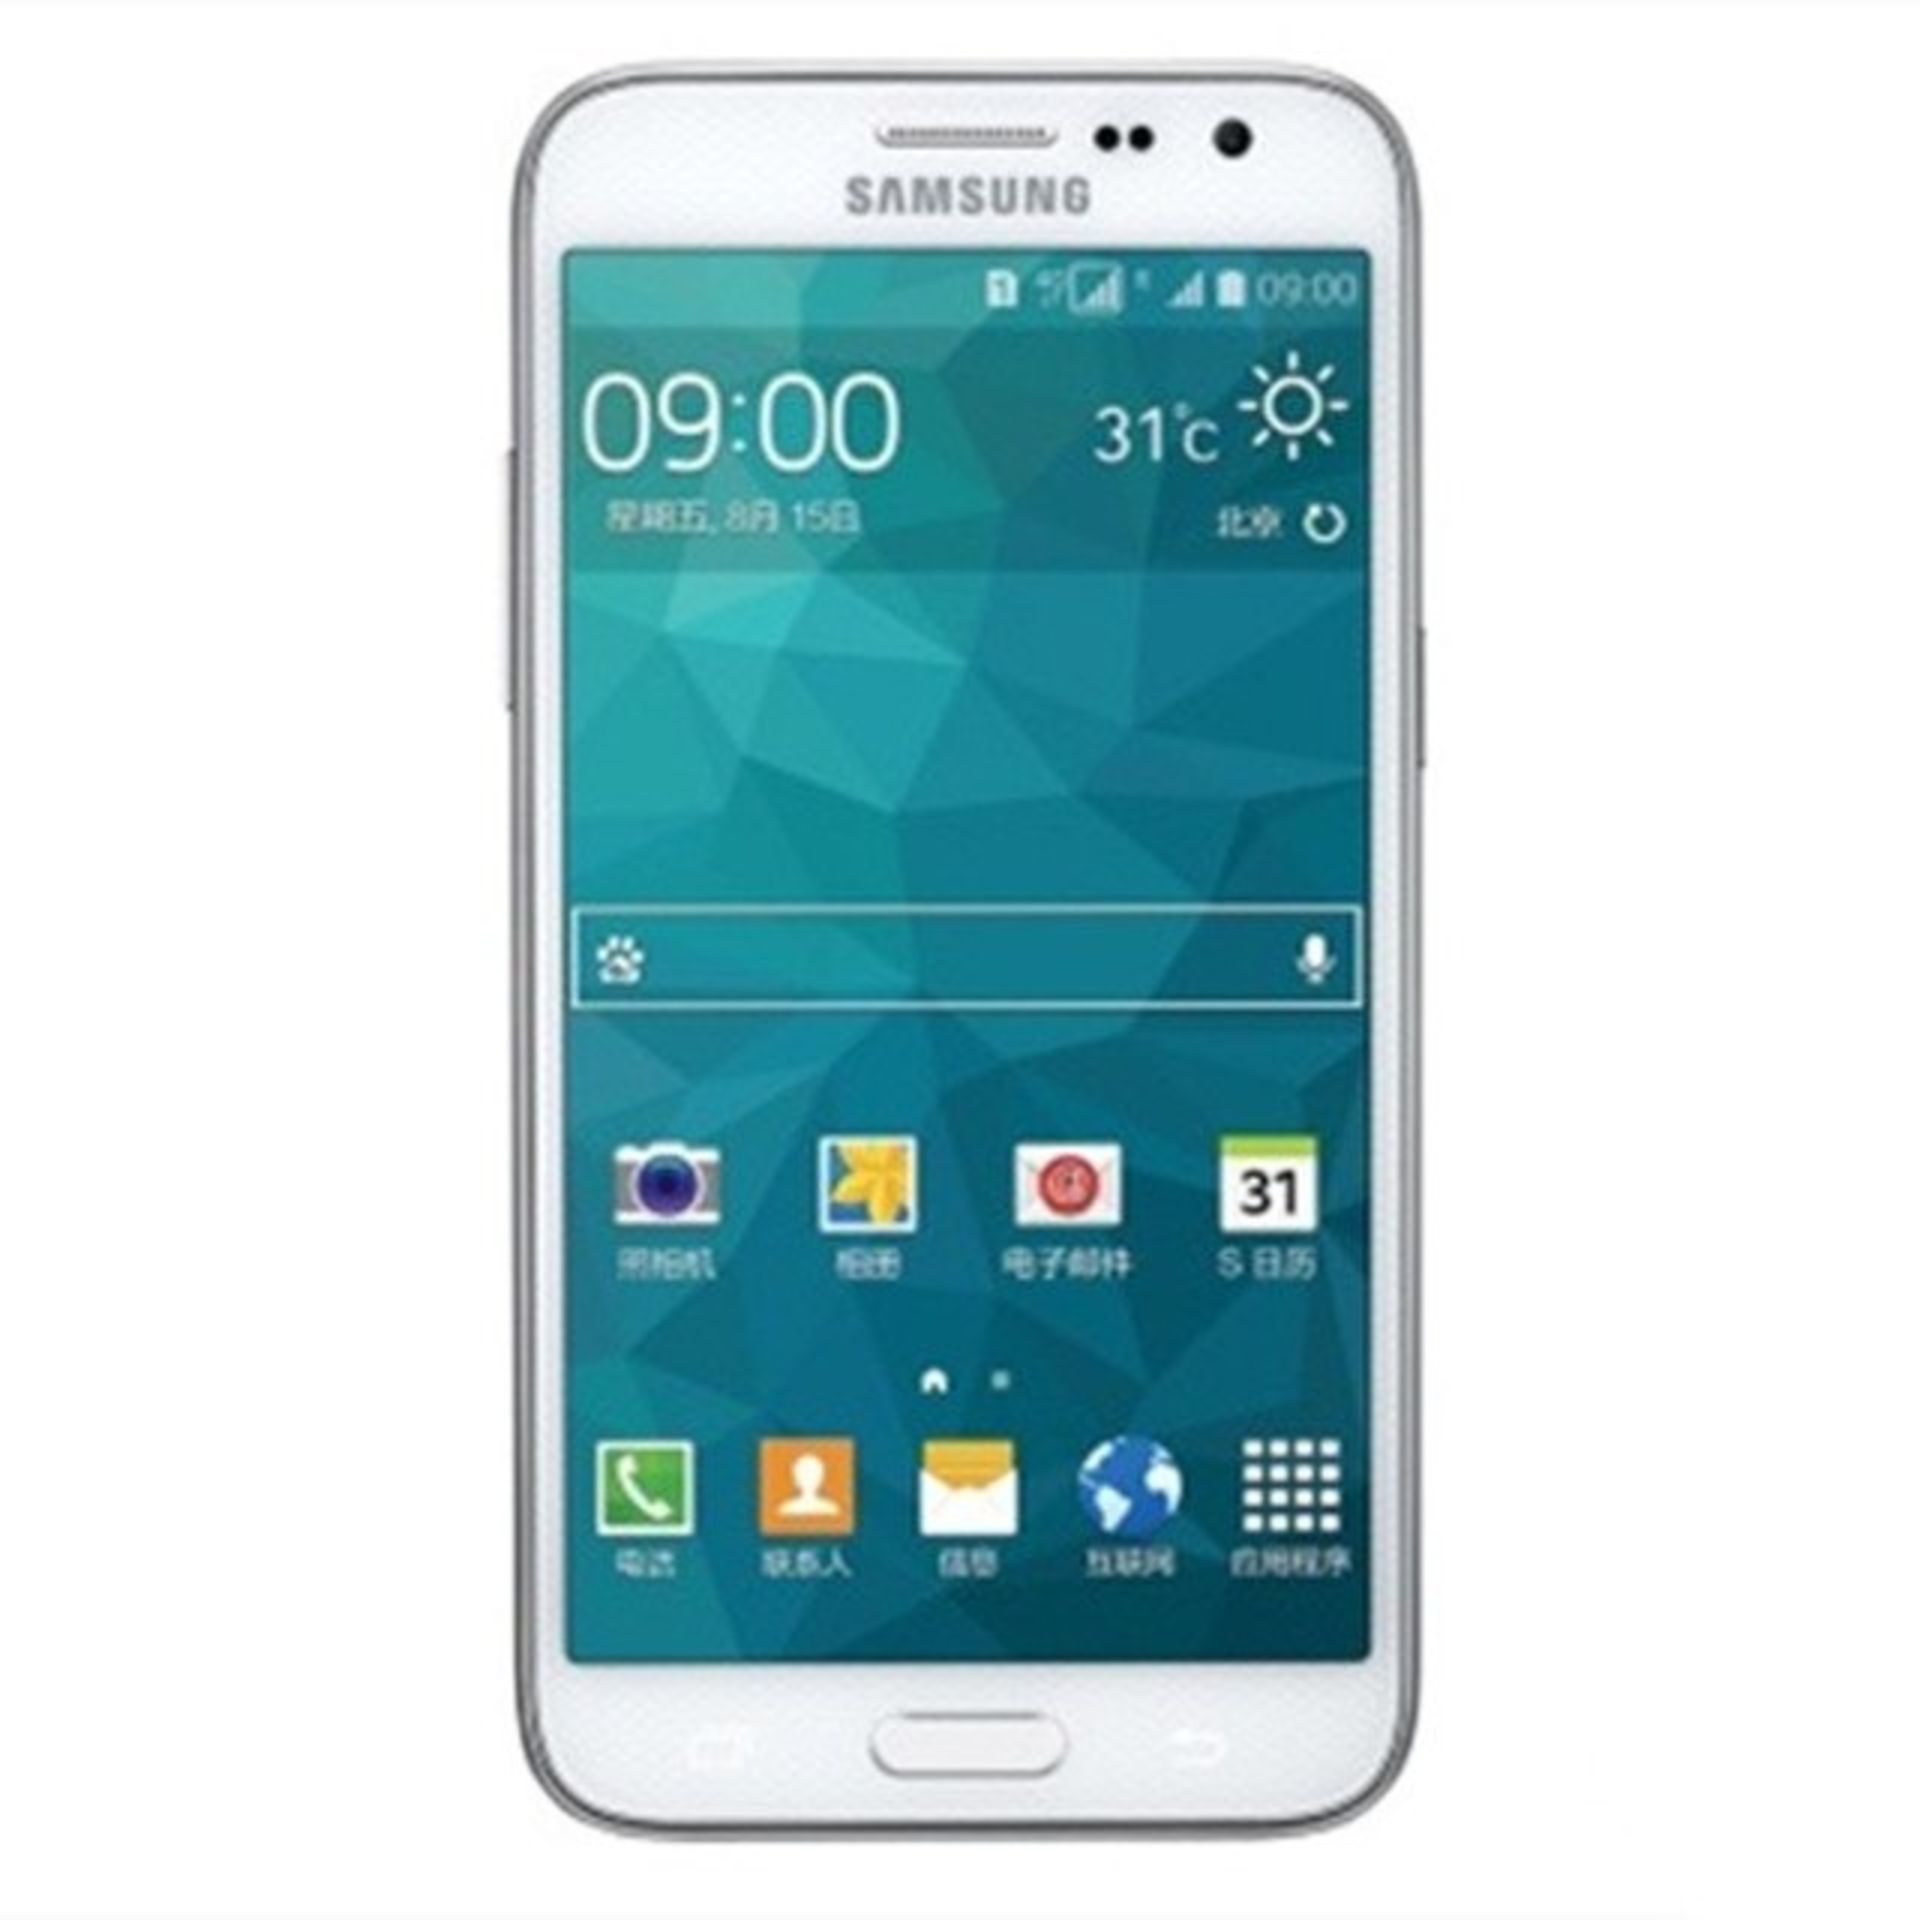 Grade A Samsung G5108Q Colours May Vary Item available approx 12 working days after sale